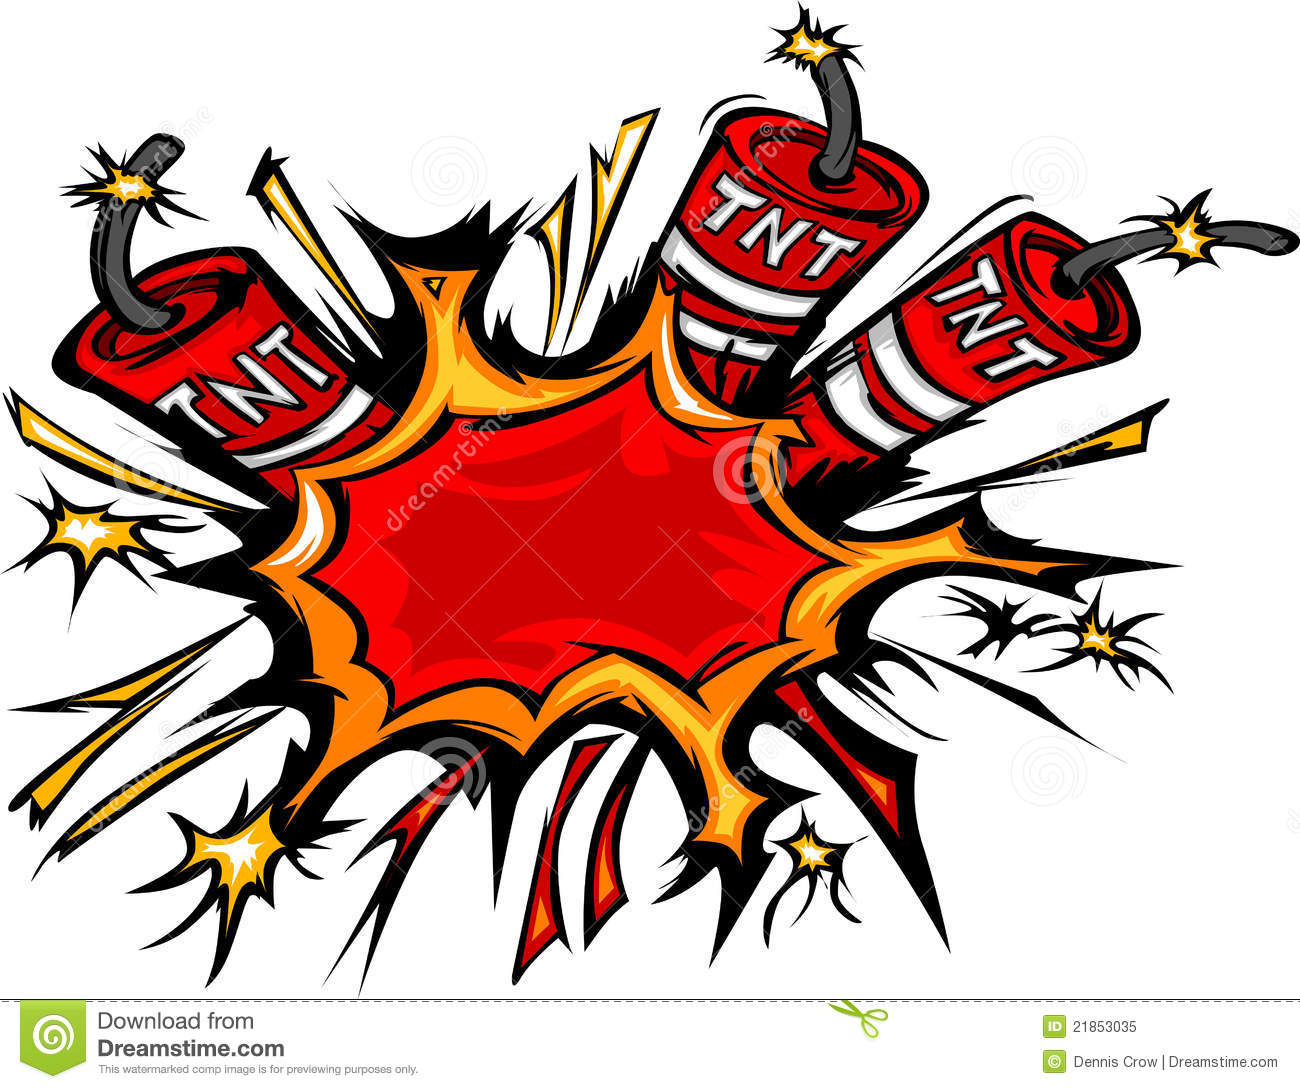 Animated Bomb Explosion Clipart   Cliparthut   Free Clipart